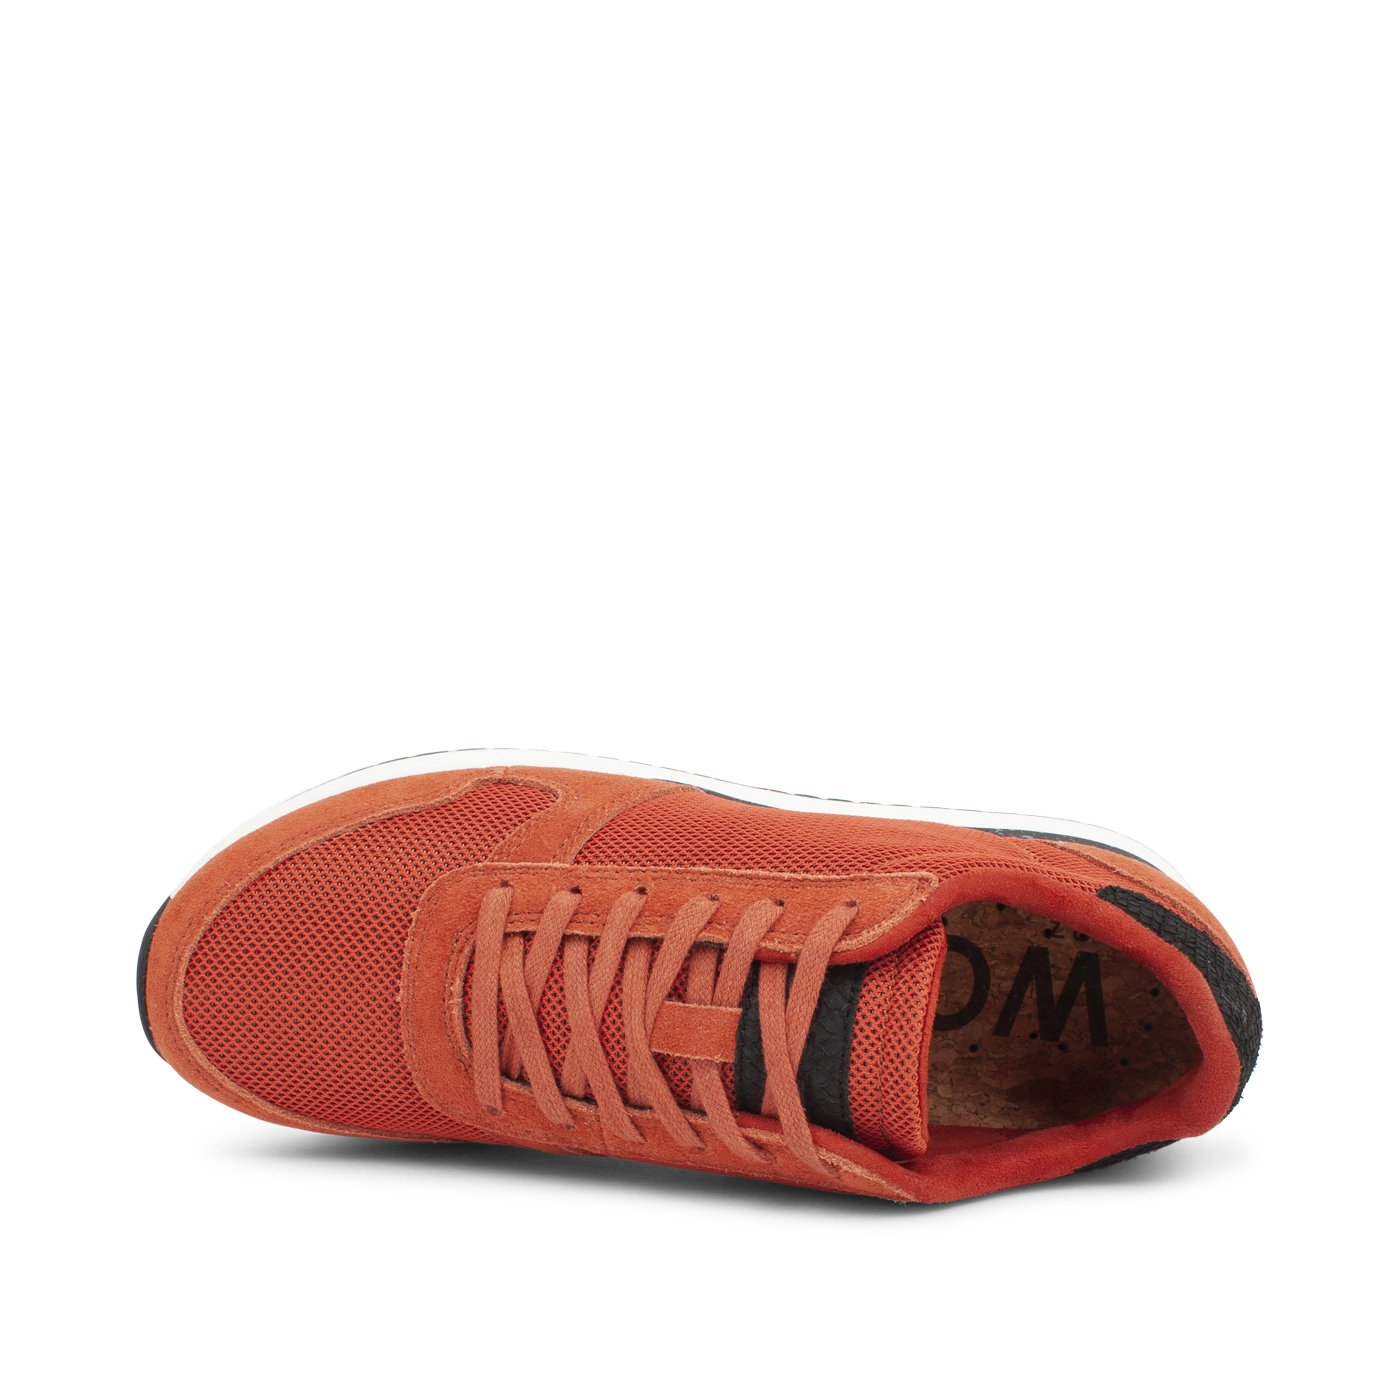 WODEN YDUN FIFTY CHILLI - Collective Shoes 